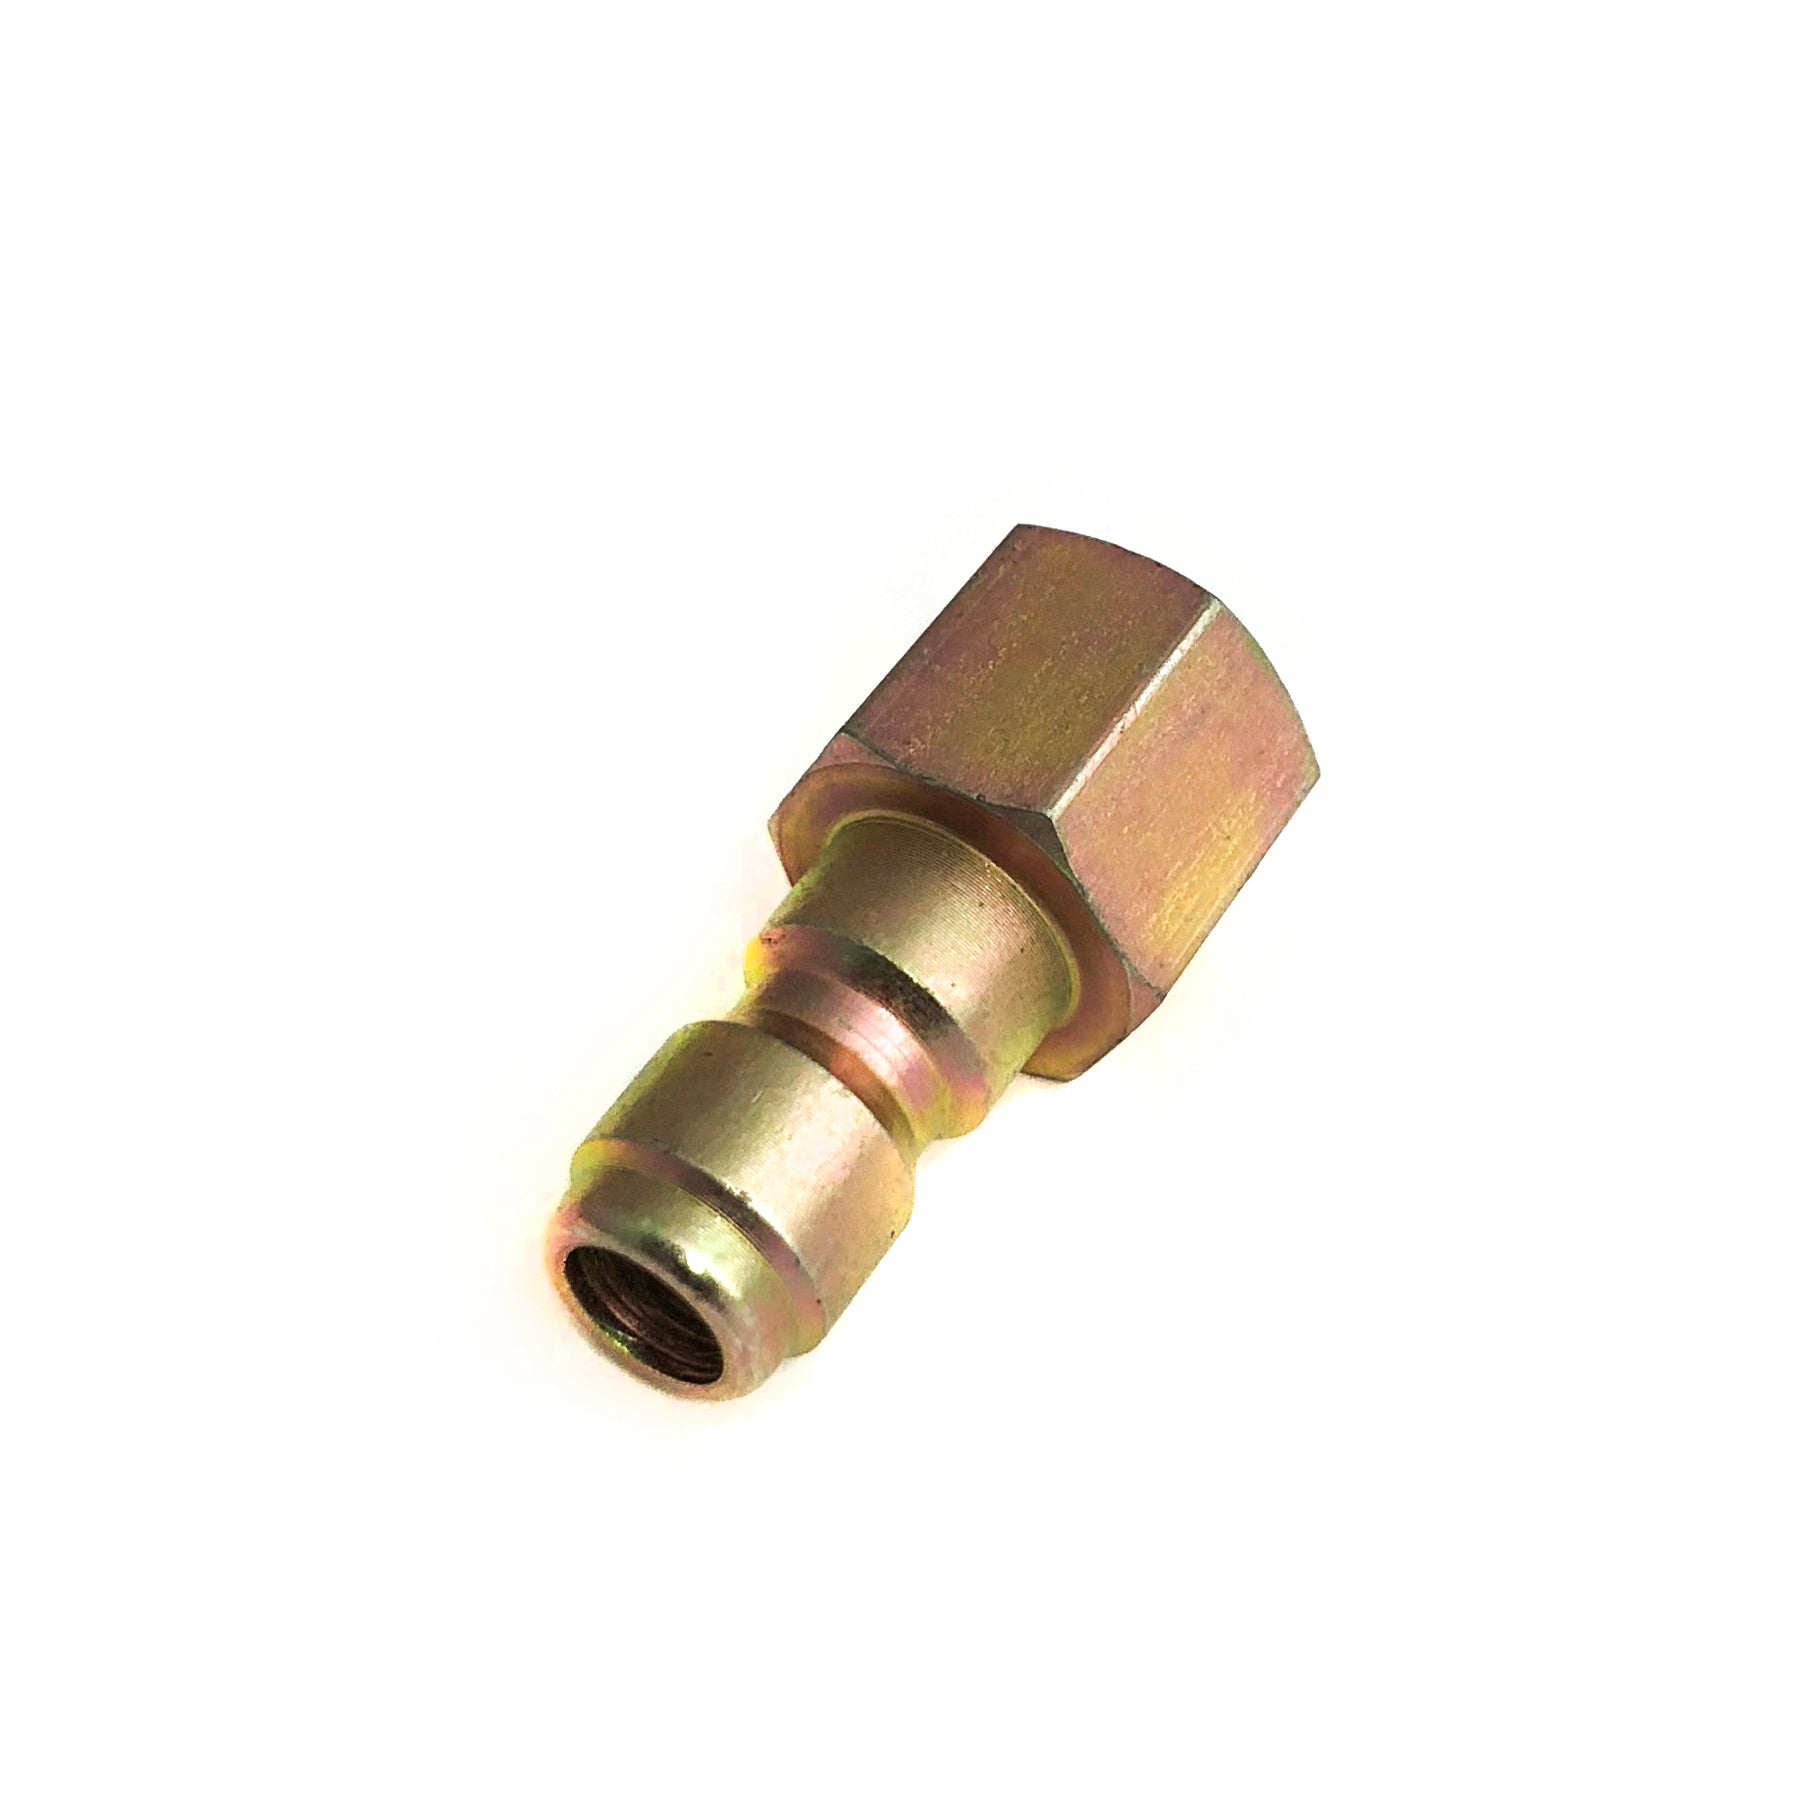 Pressure Washer Hose Fittings Brass 1-4 quick disconnect plug x female thread